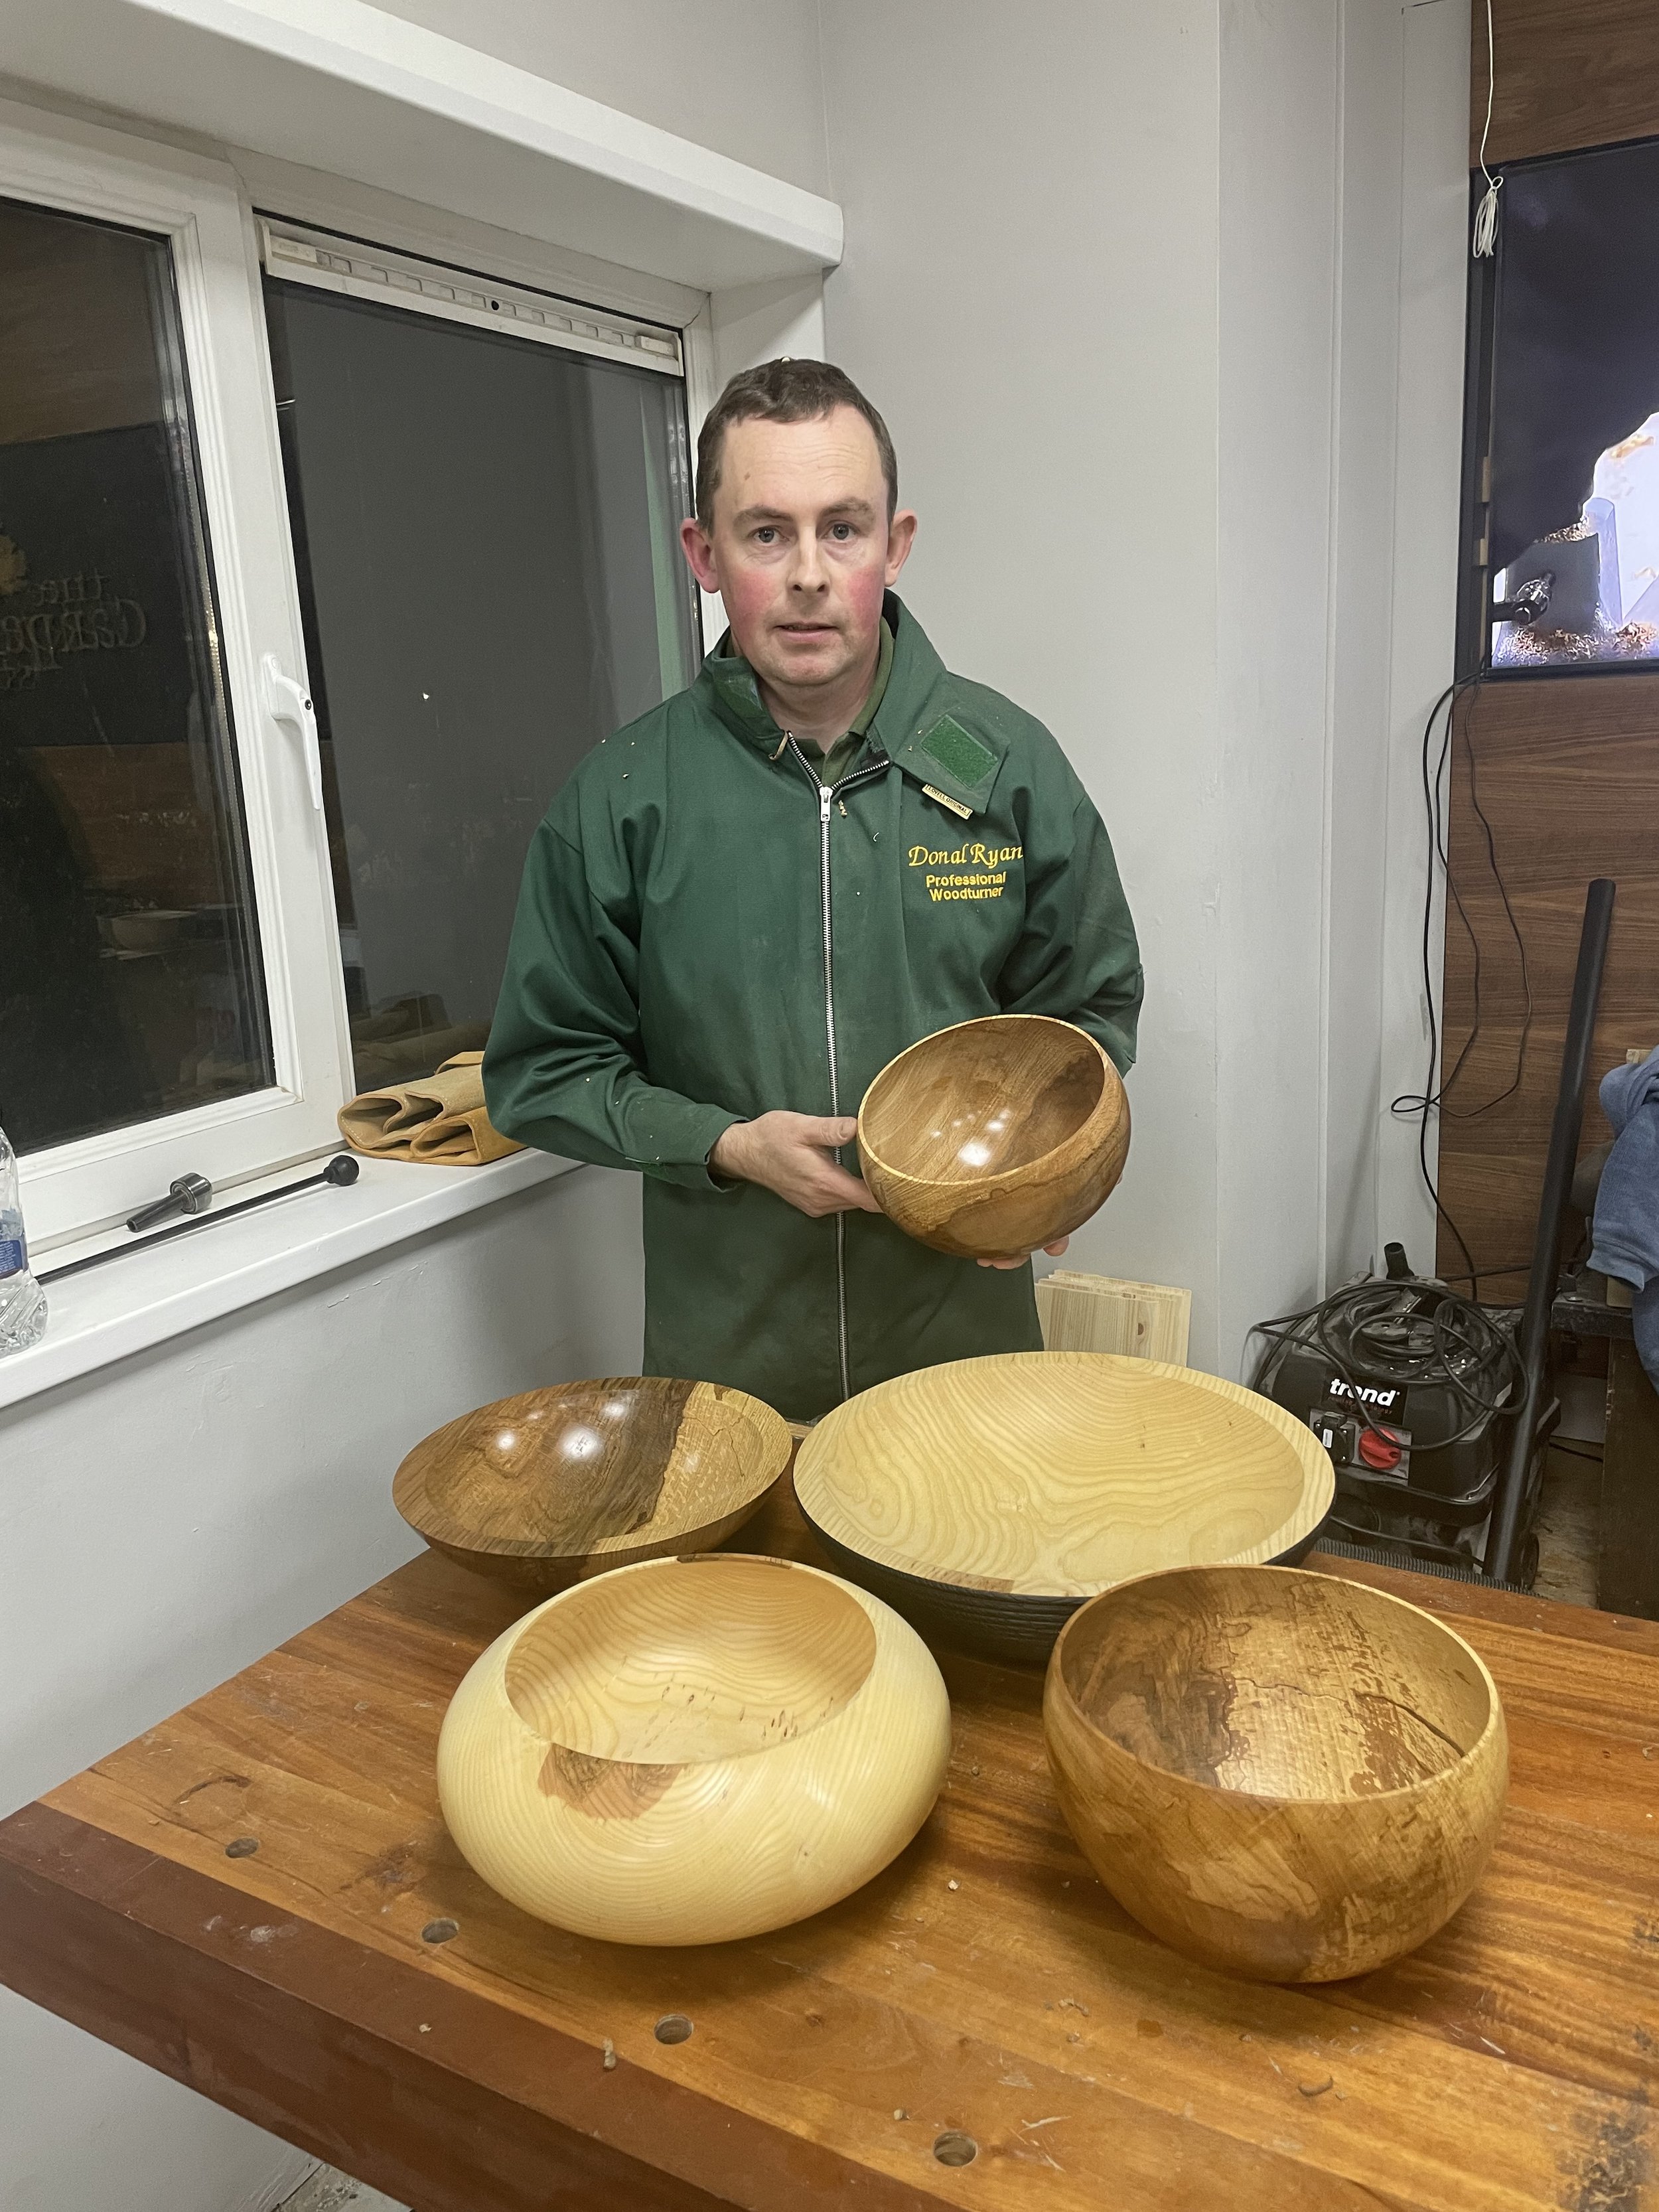 Donal Ryan's collection of bowls.JPG